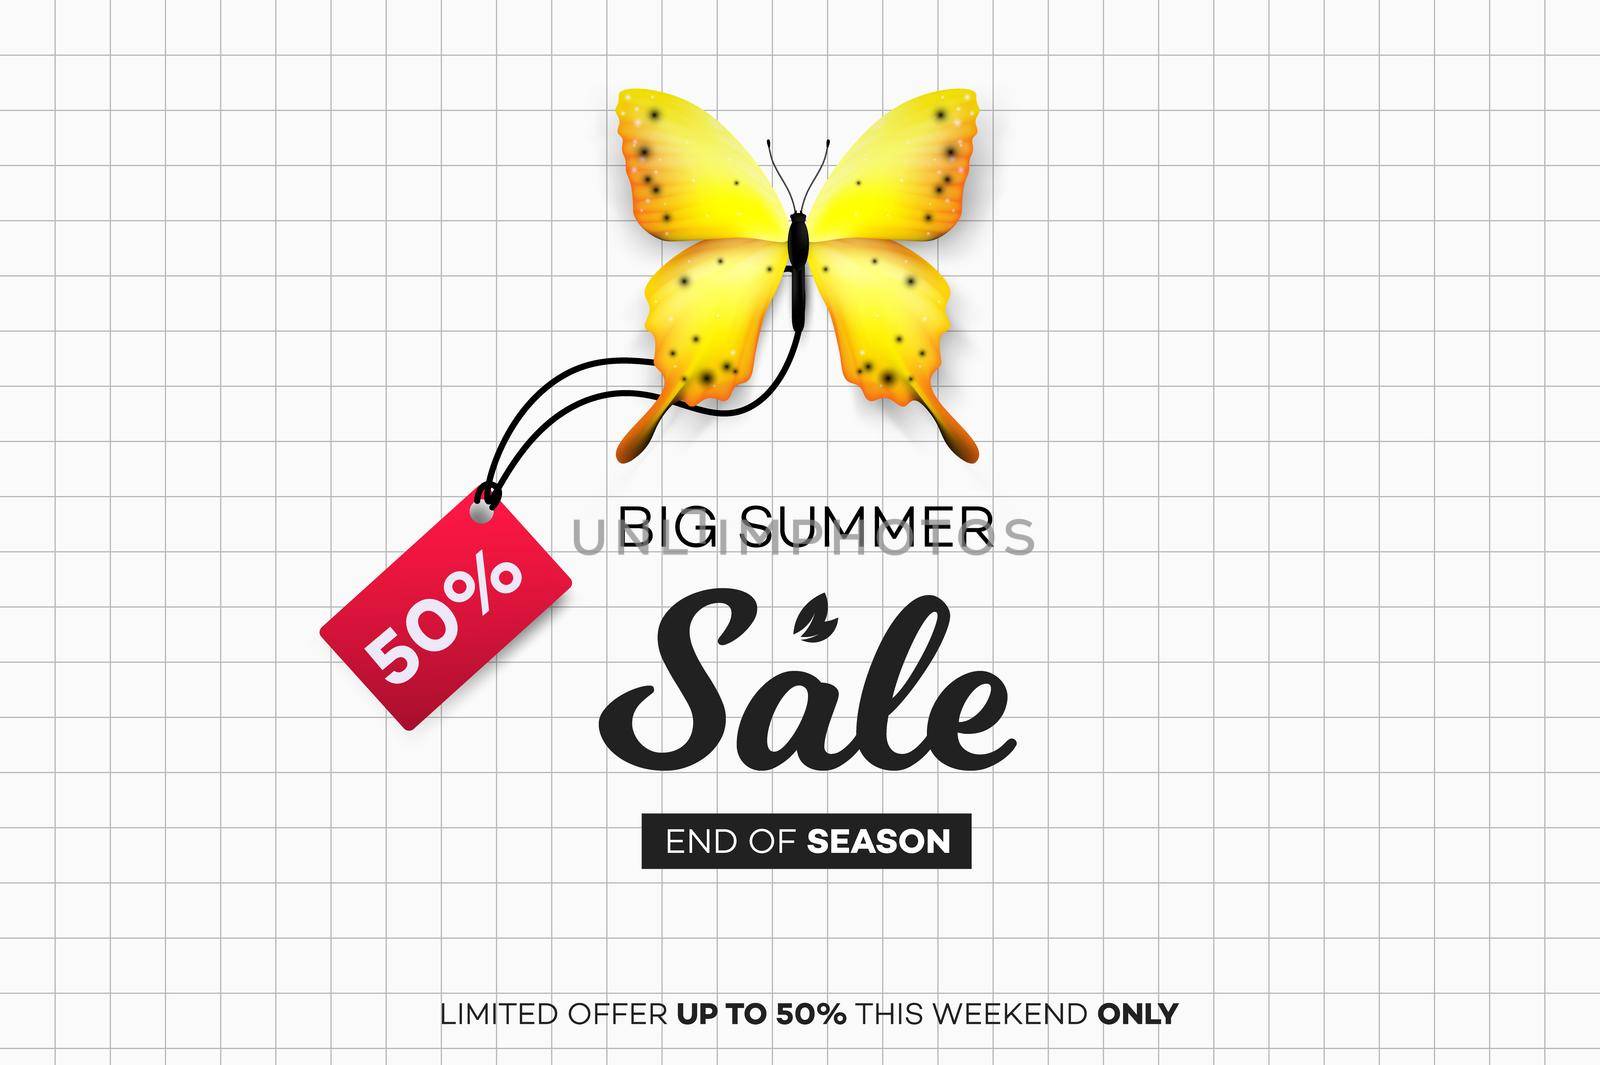 Final Summer Sale. Yellow Butterfly With Sale Tag Over Notebook Sheet. Modern Conceptual Vector Illustration by Yarkee